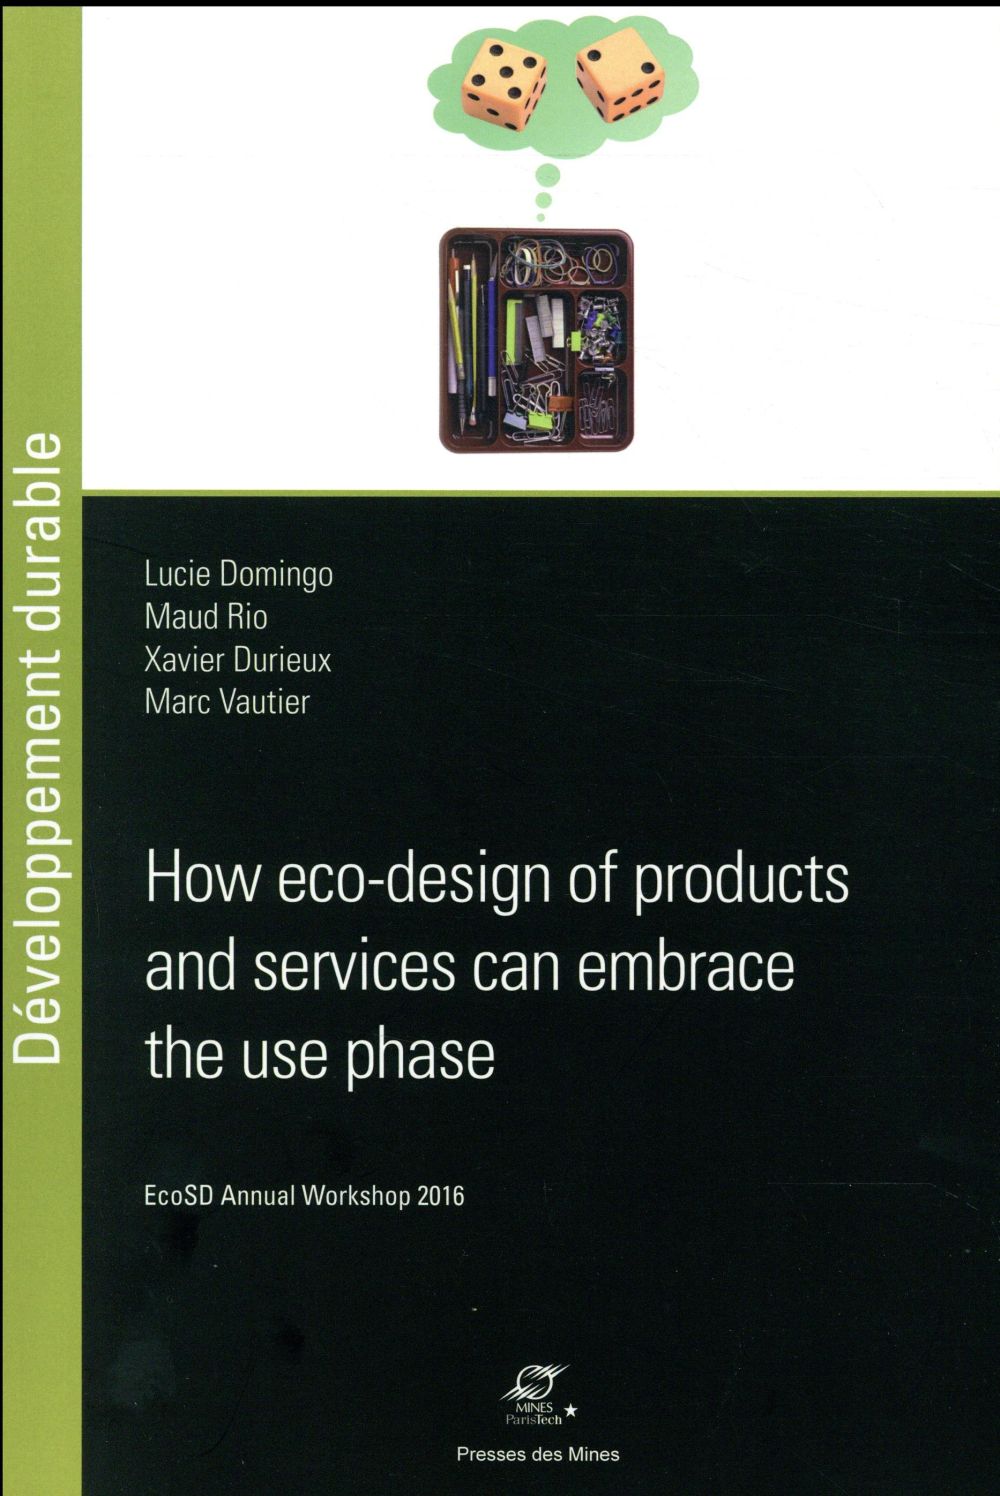 HOW ECO-DESIGN OF PRODUCTS AND SERVICES CAN EMBRACE THE USE PHASE - ECOSD ANNUAL WORKSHOP 2016